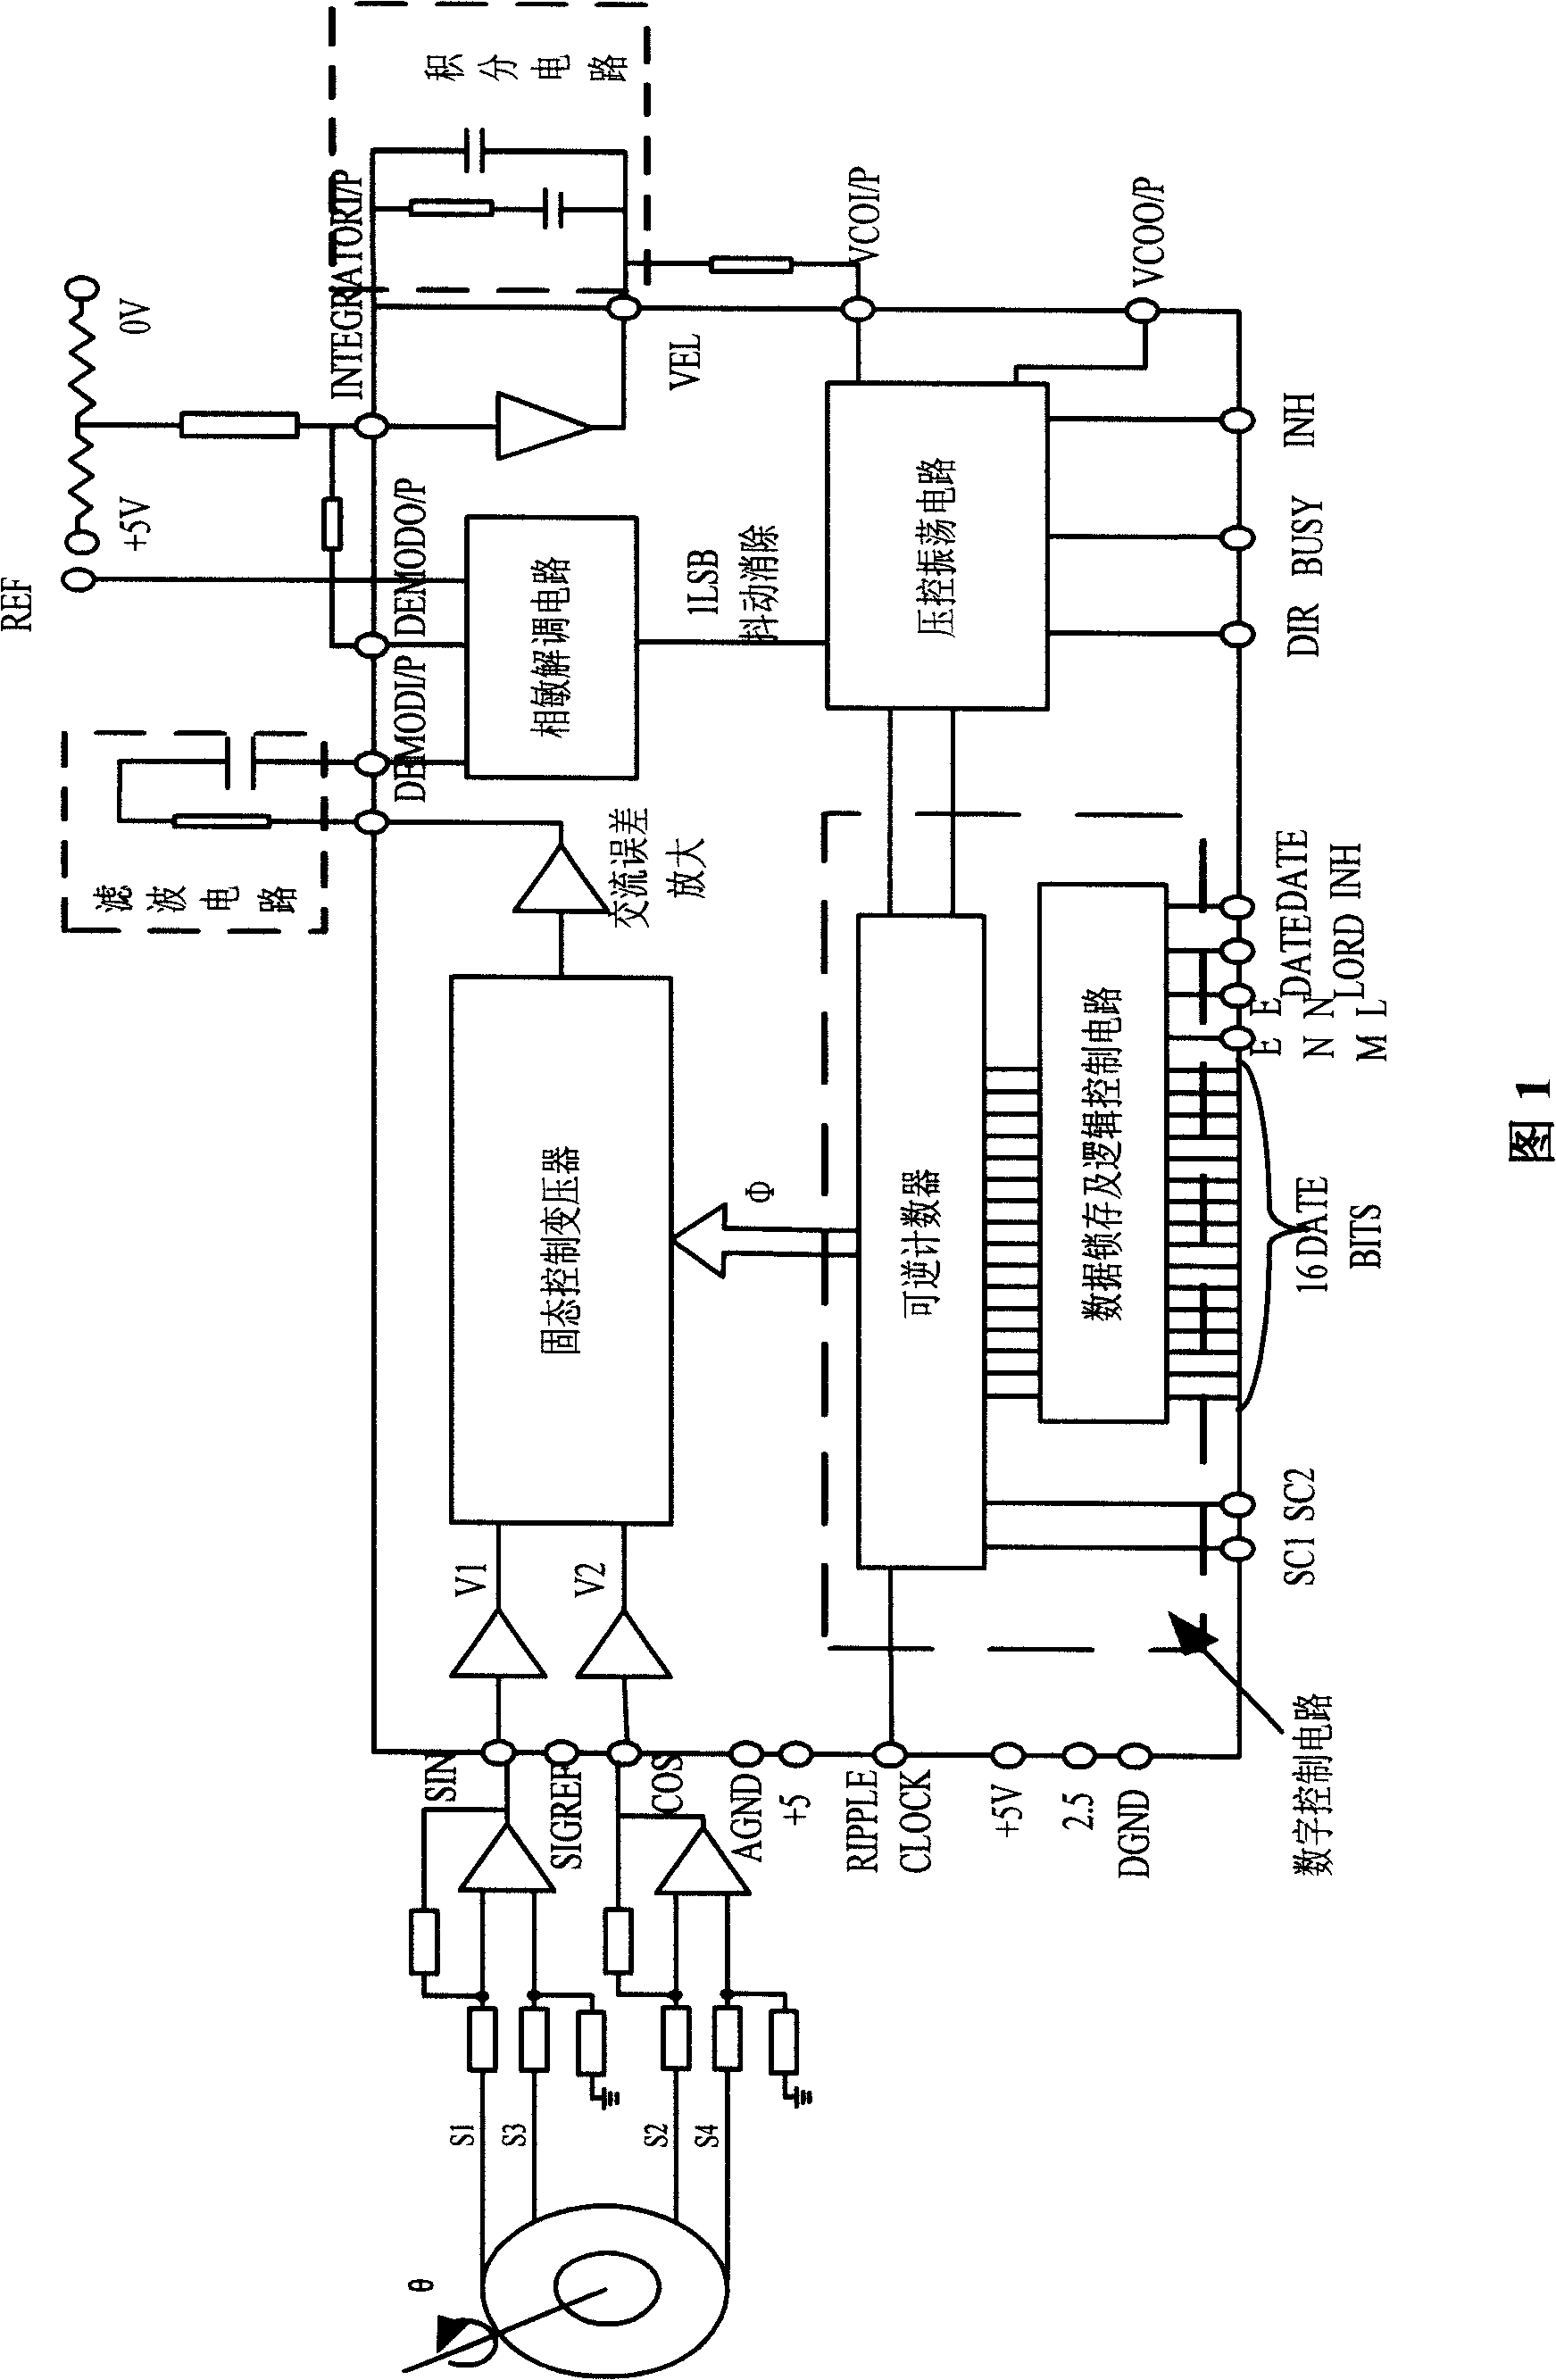 Single power supply CMOS integrated circuit autosyn / rotary transformer - digital conversion technique